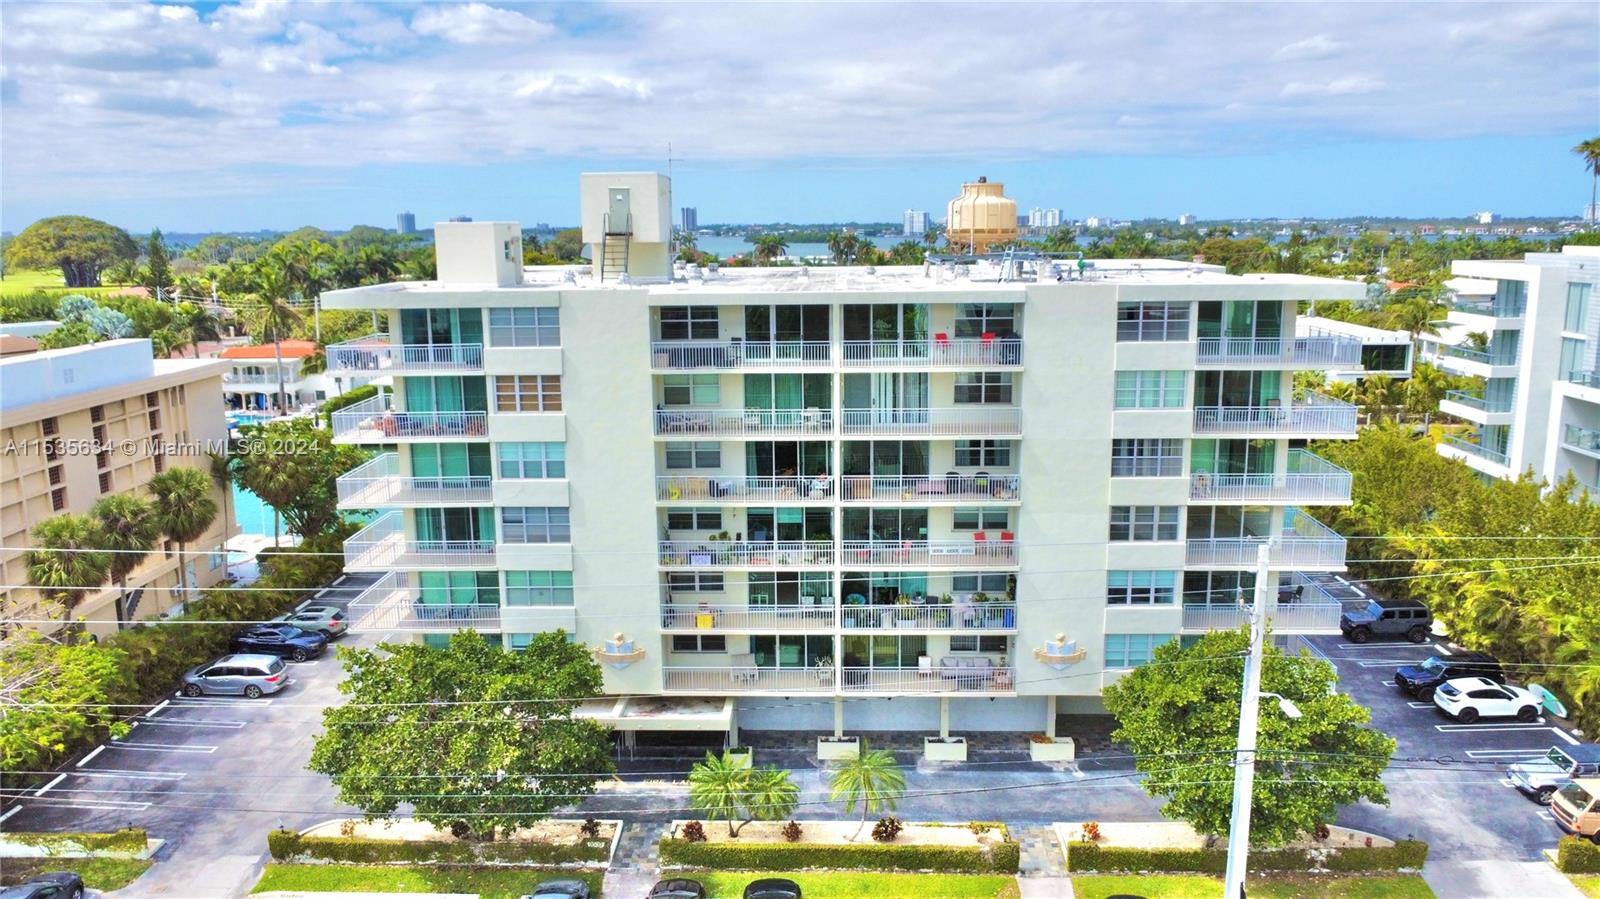 Nestled in the heart of Bay Harbor Islands! 1-bedroom, 1.5-bathroom haven bathed in natural light. With 1000 sq/ ft. of space, this charming condo welcomes you with open arms. Step onto the wrap-around balcony and breathe in the fresh air as you bask in the partial water view. Convenience is at your doorstep, with a top grade school just across the street and the shimmering shores of the beaches mere minutes away. Retail therapy awaits at the nearby shopping stores, including the renowned Bal Harbour shops. This unit offers a new AC in 2023 and a fresh water heater, this home also boasts assigned parking for your convenience. This unit offers a canvas for you to unleash your creativity and make it your own slice of paradise.